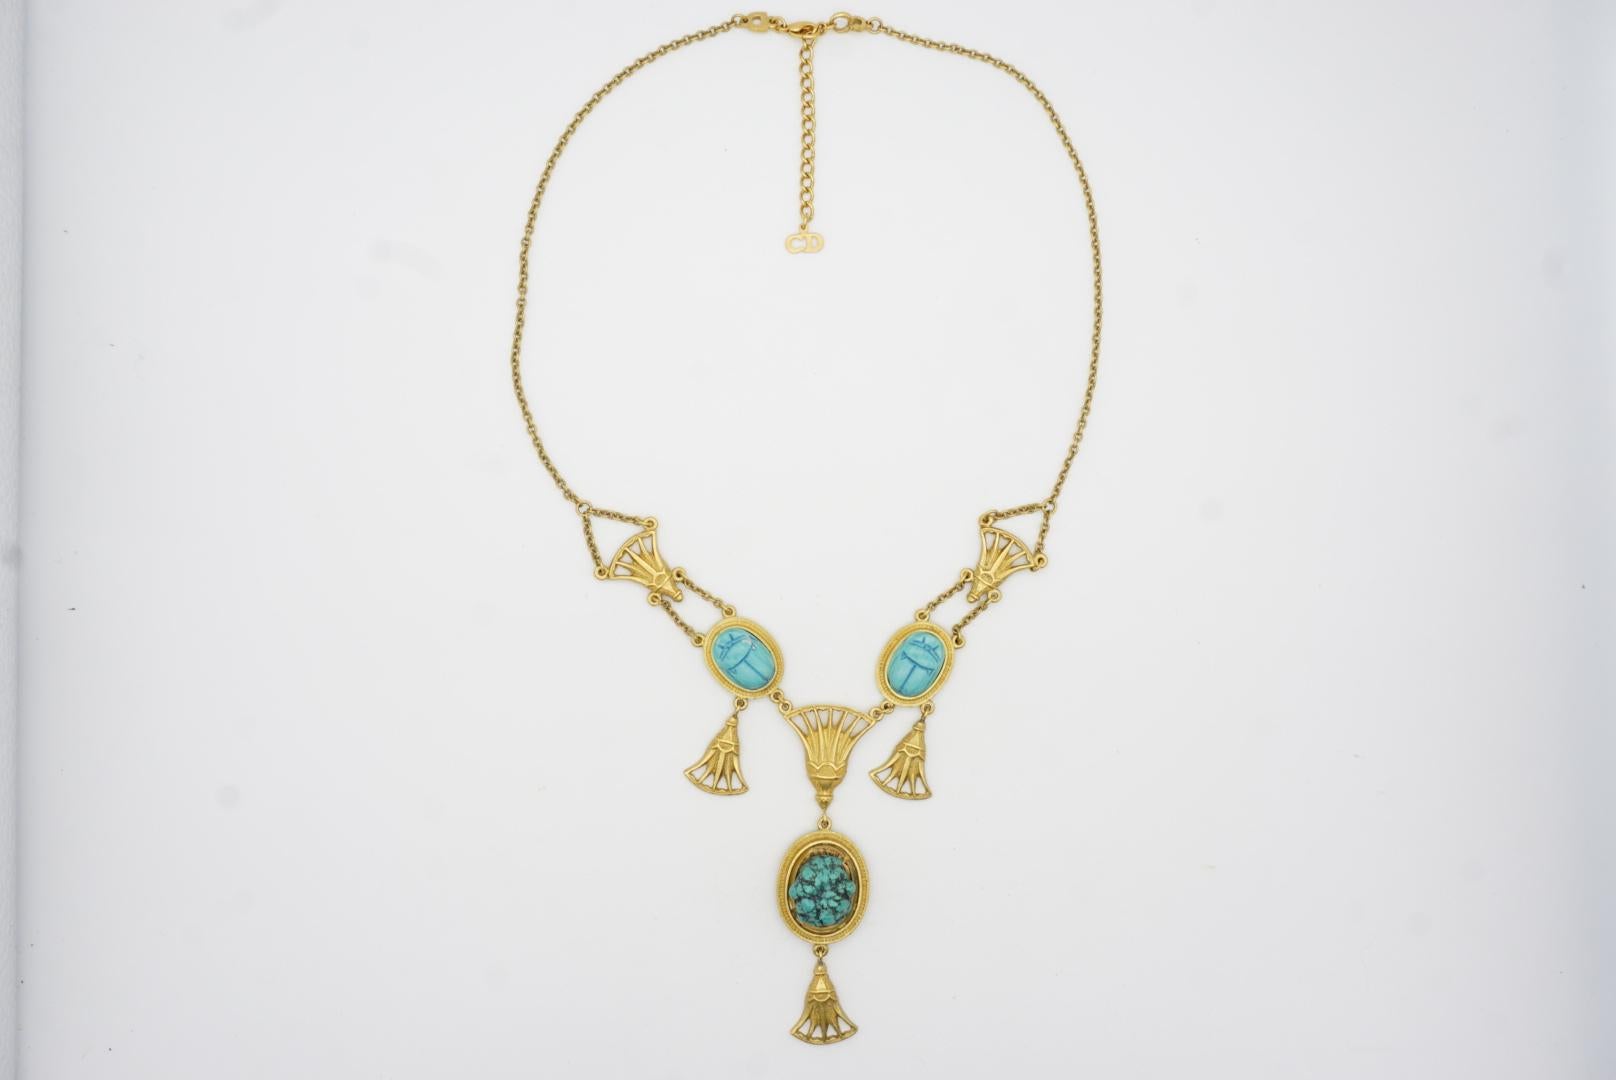 CHRISTIAN DIOR by John Galliano 2004 Egyptian Revival Turquoise Scarab Necklace For Sale 4